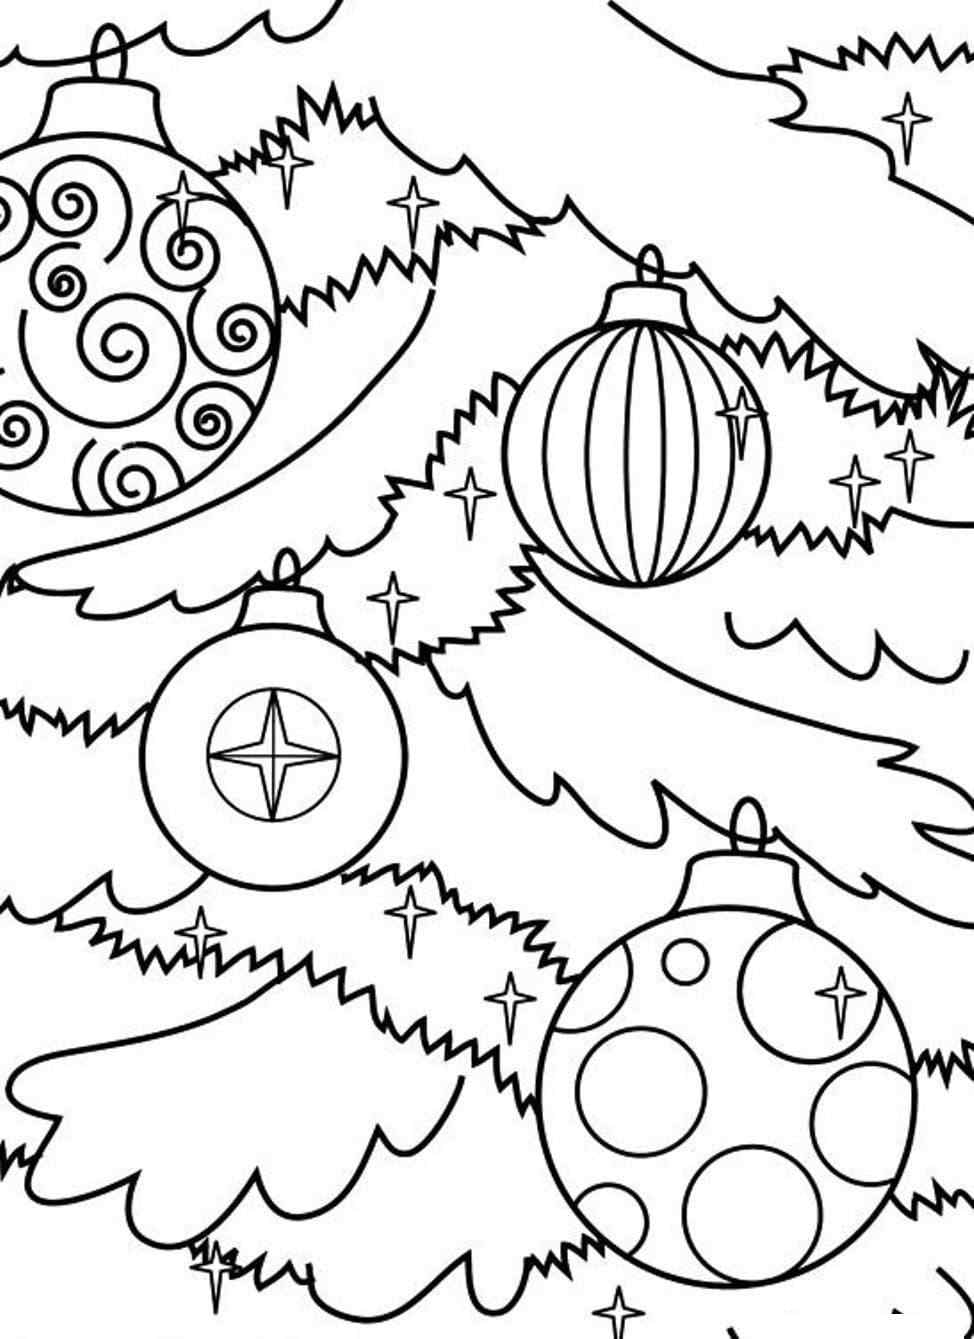 Decorated With Christmas balls Coloring Page